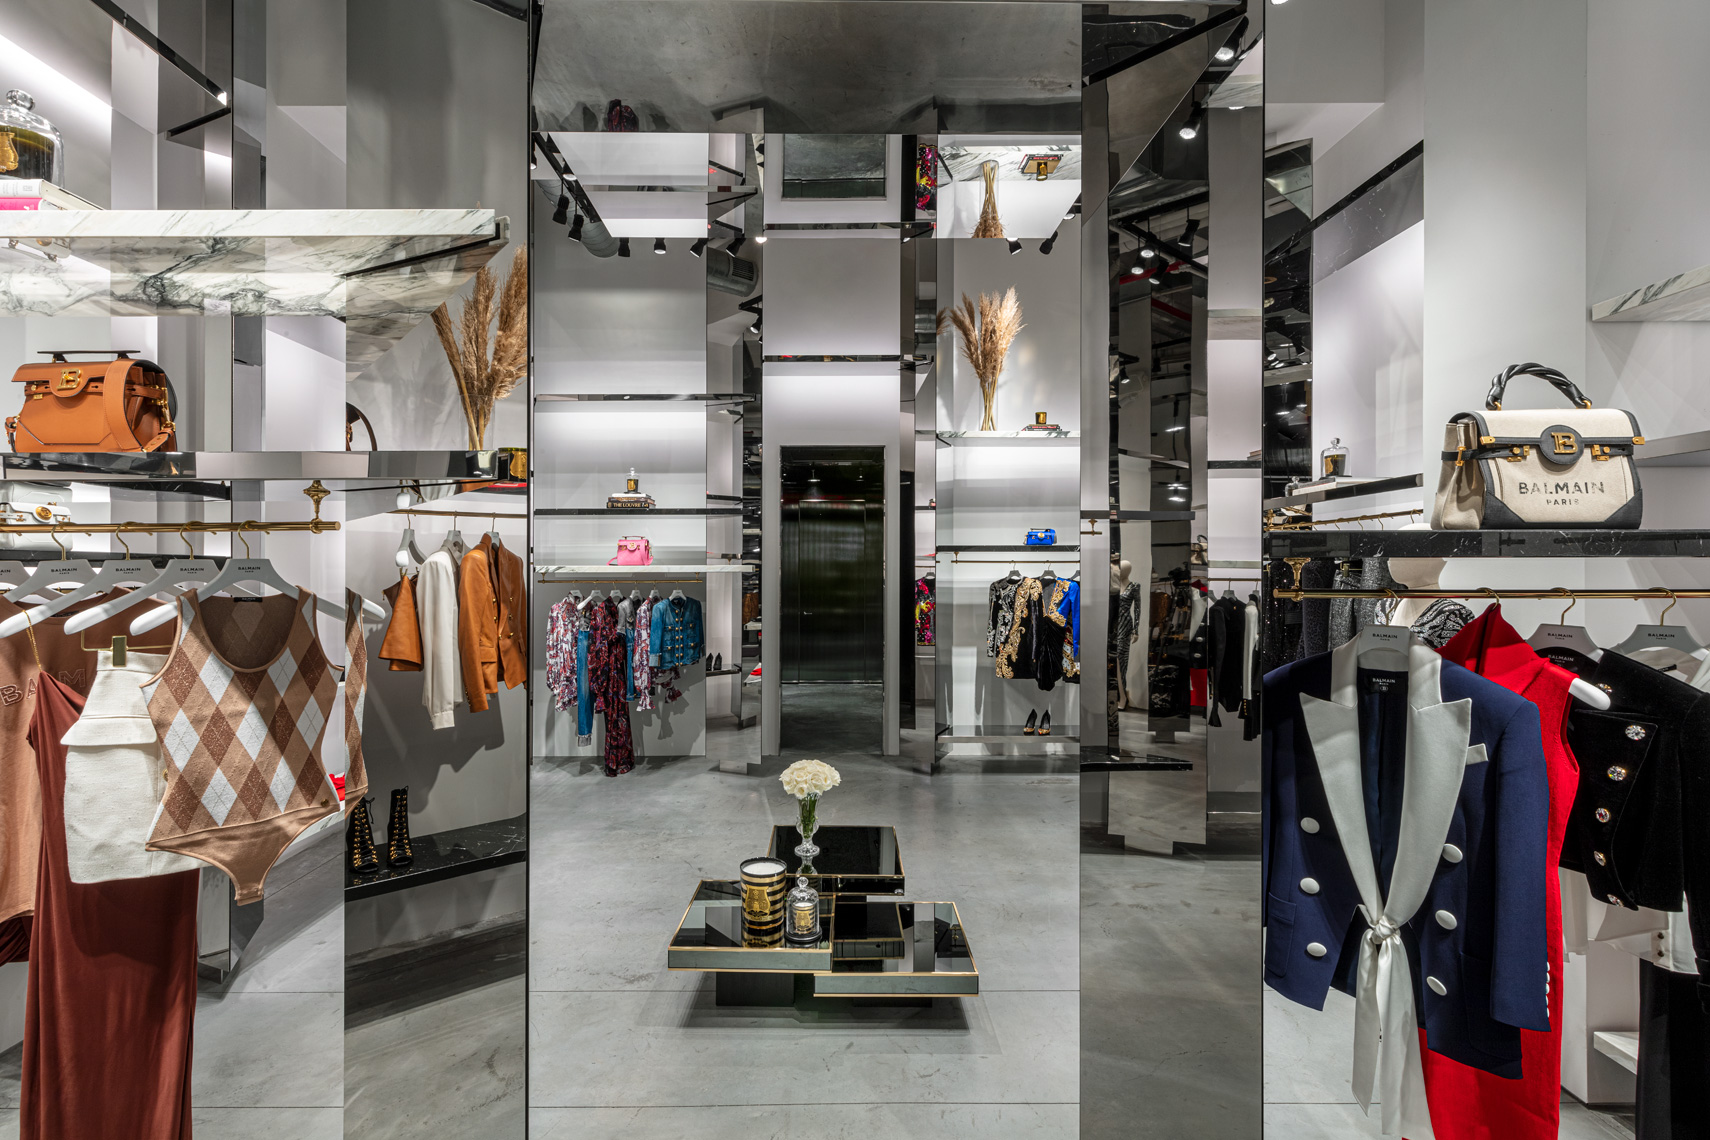 Launches Return to NYC's Masion Ave. With New Store | Impression